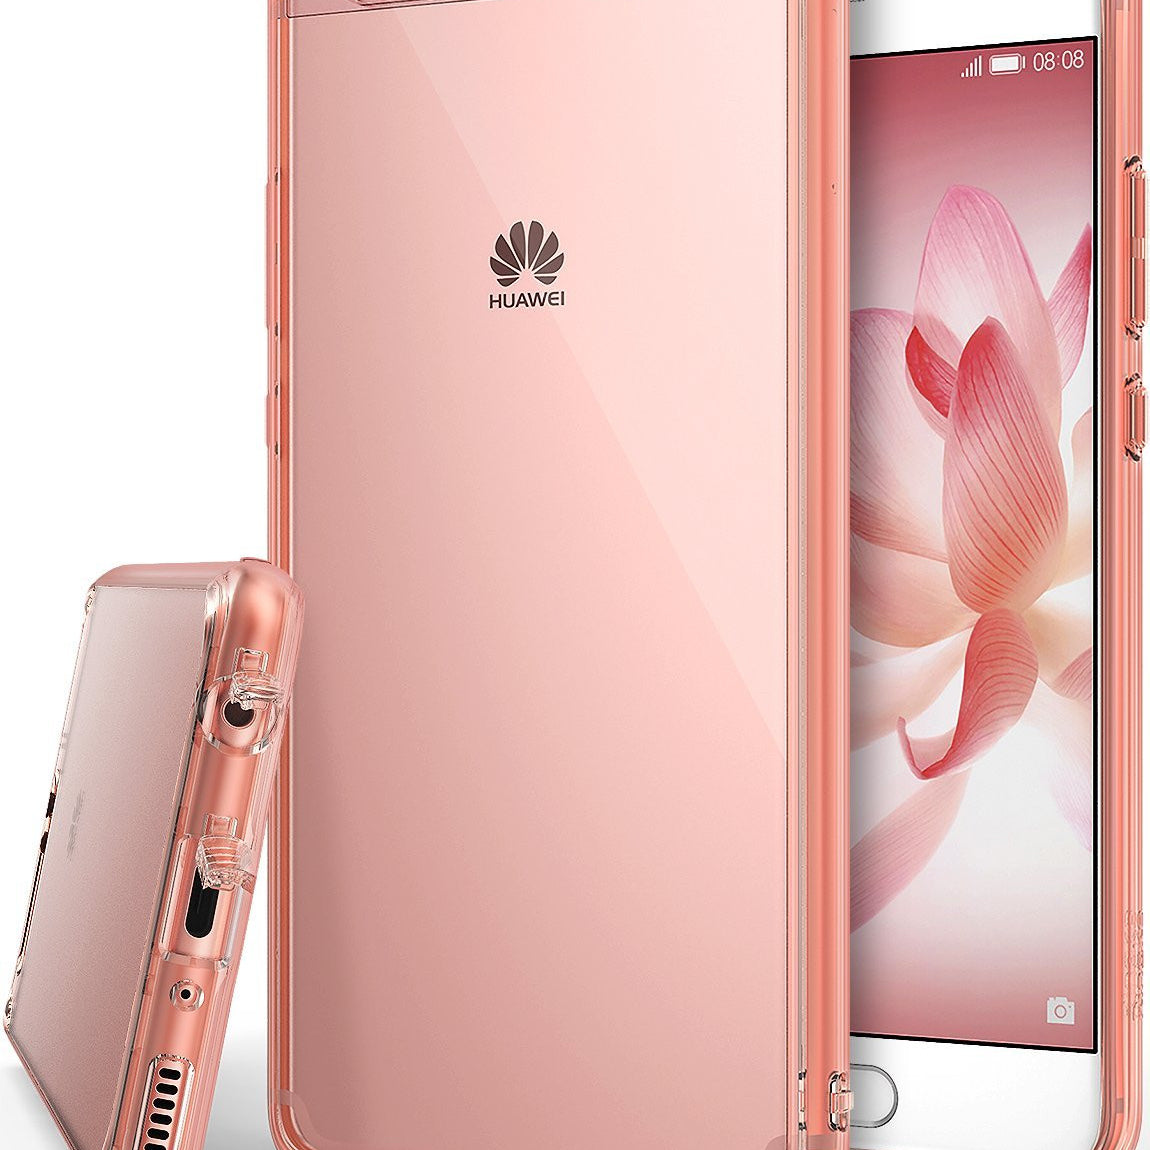 huawei p10 plus case ringke fusion case crystal clear pc back tpu bumper case rose gold crystal